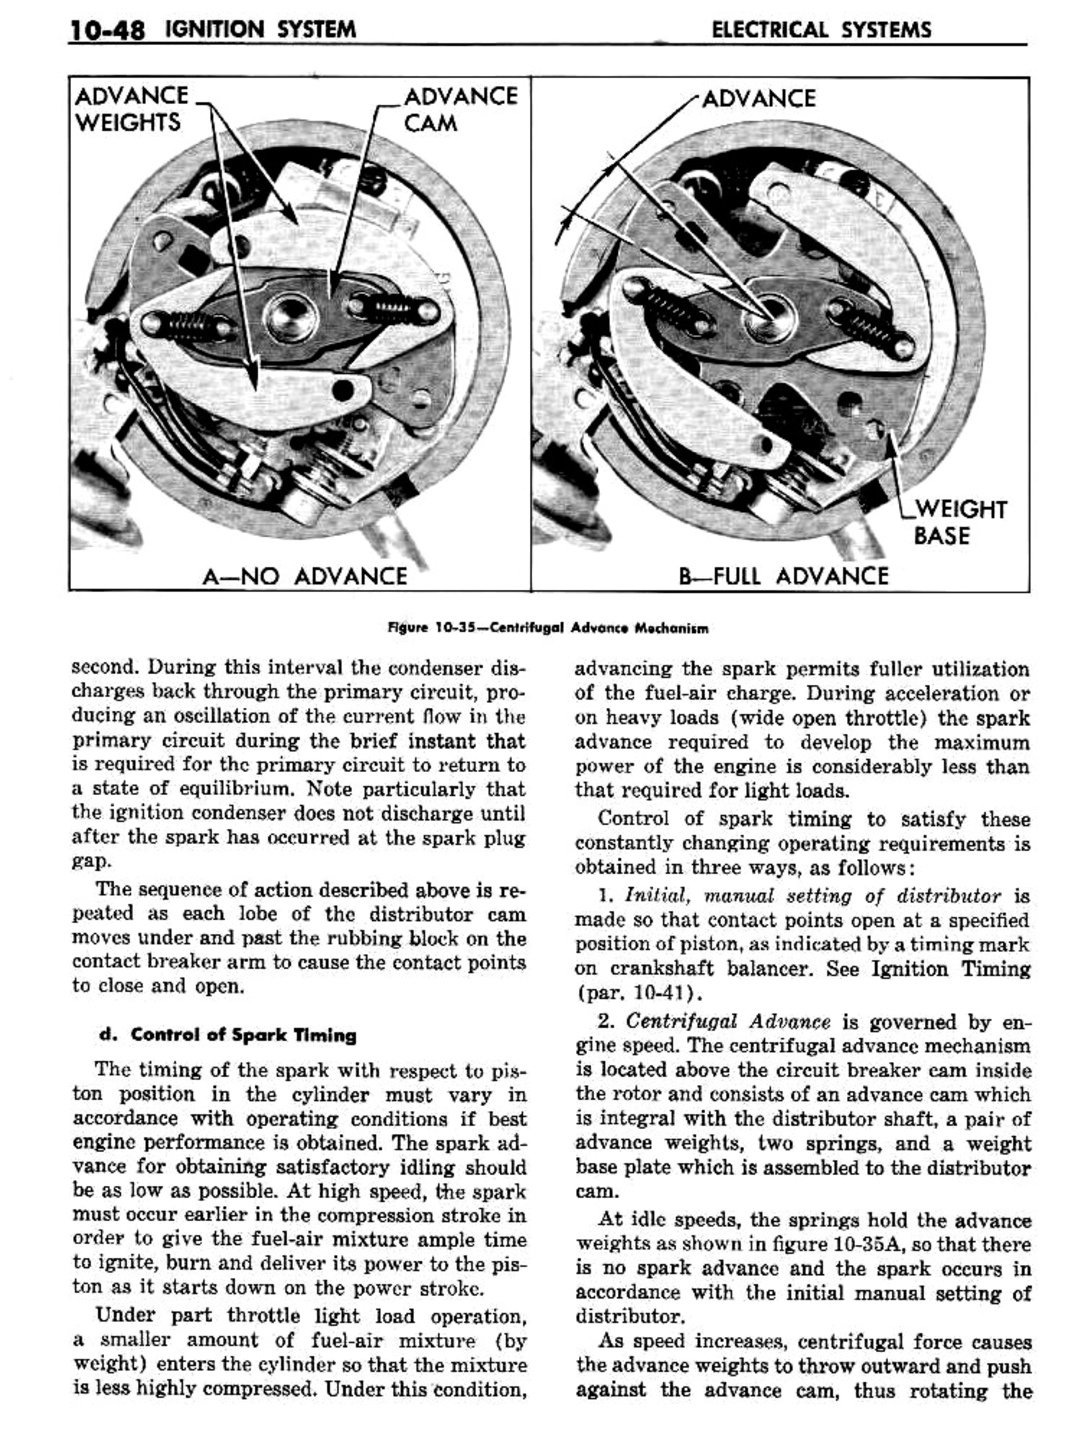 n_11 1960 Buick Shop Manual - Electrical Systems-048-048.jpg